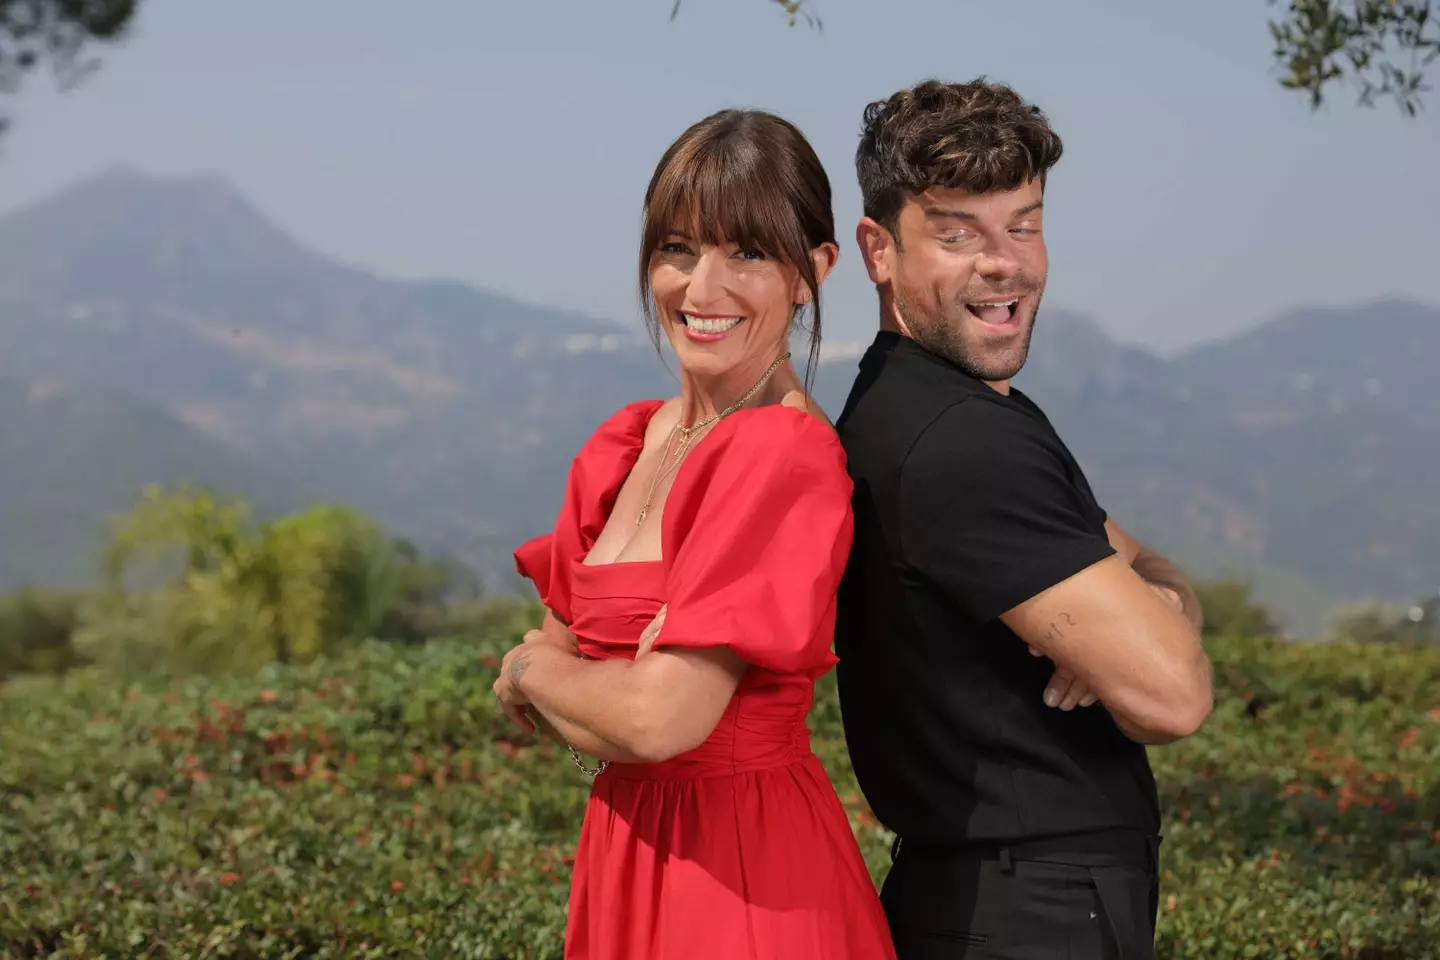 It's hosted by Davina McCall and Ricky Merino (